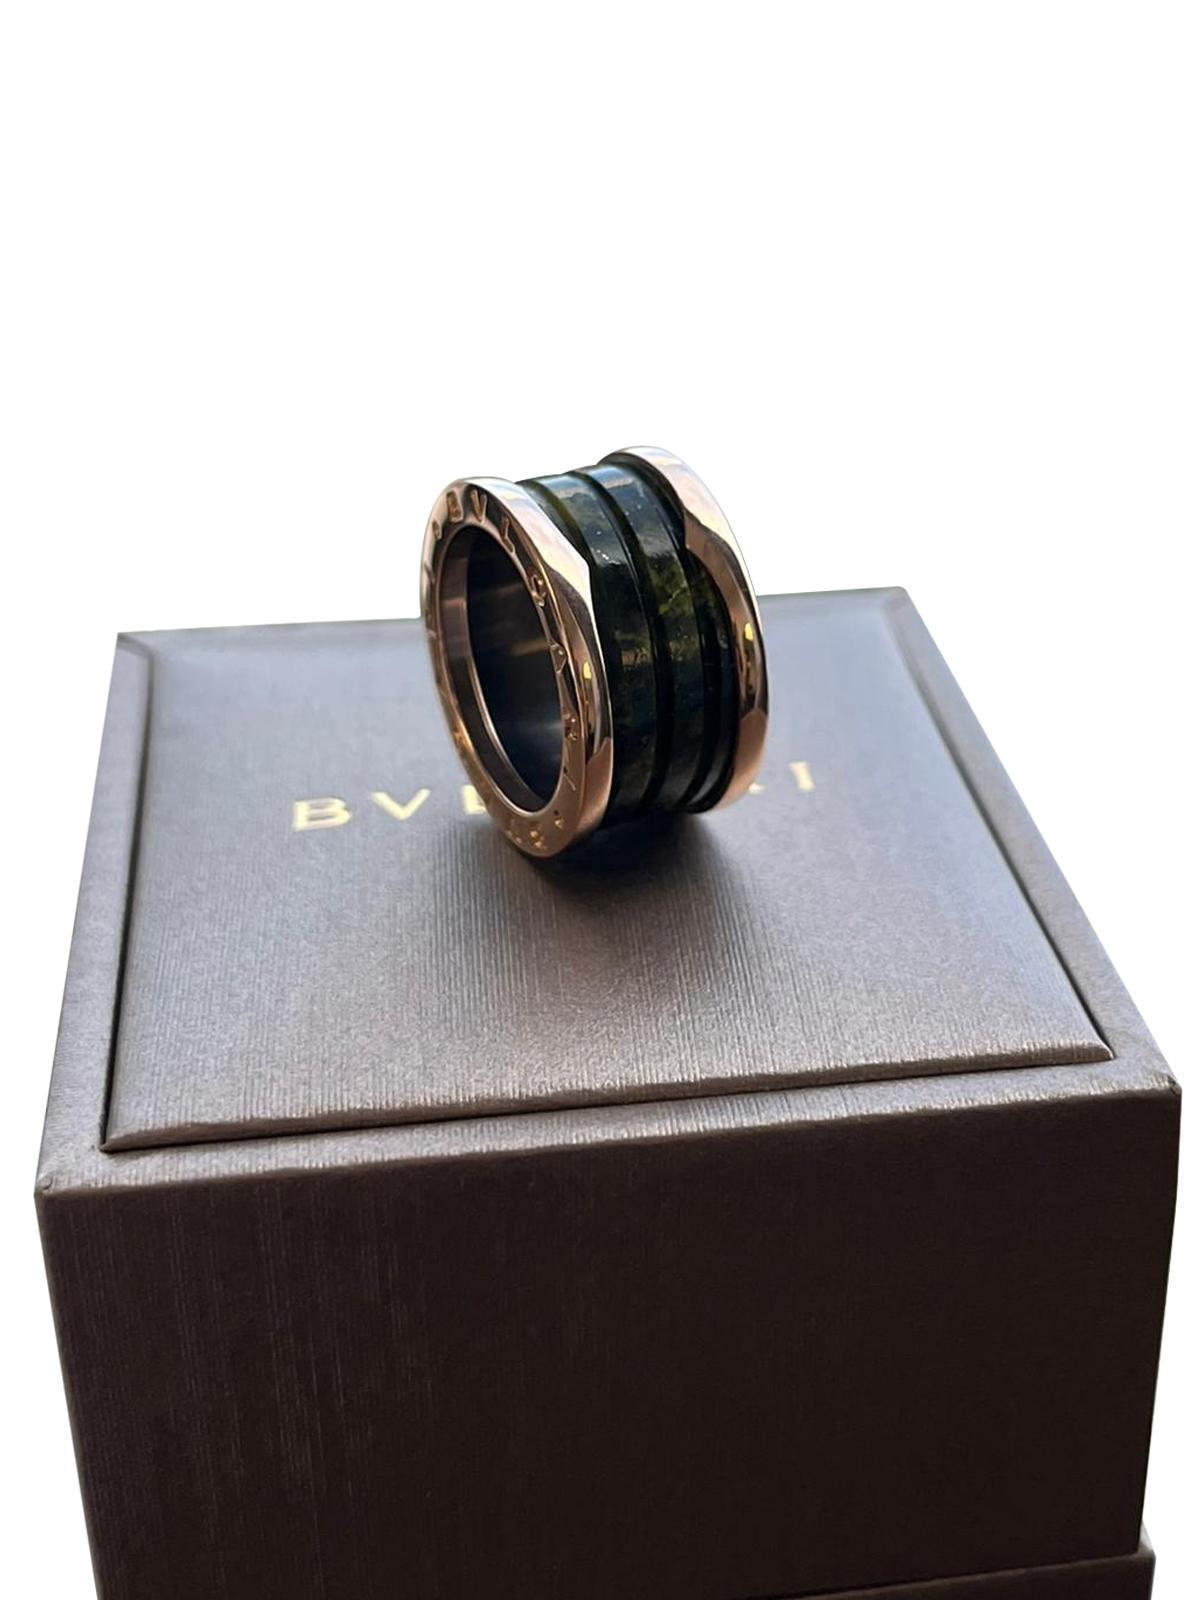 Bvlgari B.Zero1 18k Rose Gold 4-Band with Green Marble Ring In Excellent Condition For Sale In Aventura, FL